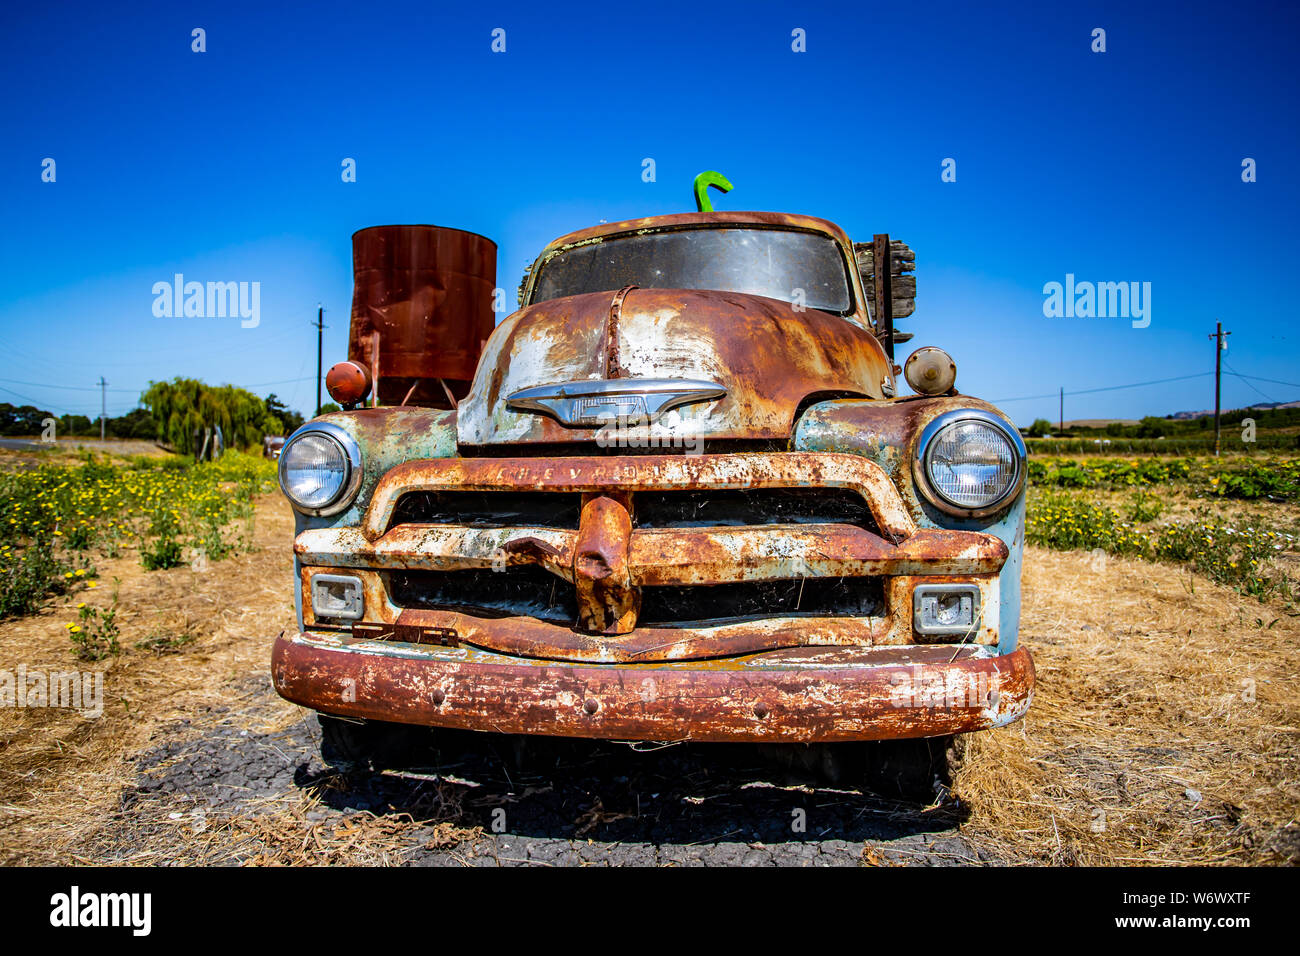 Abandoned old trucks are left in fields along Adobe Road, Sonoma, California Stock Photo